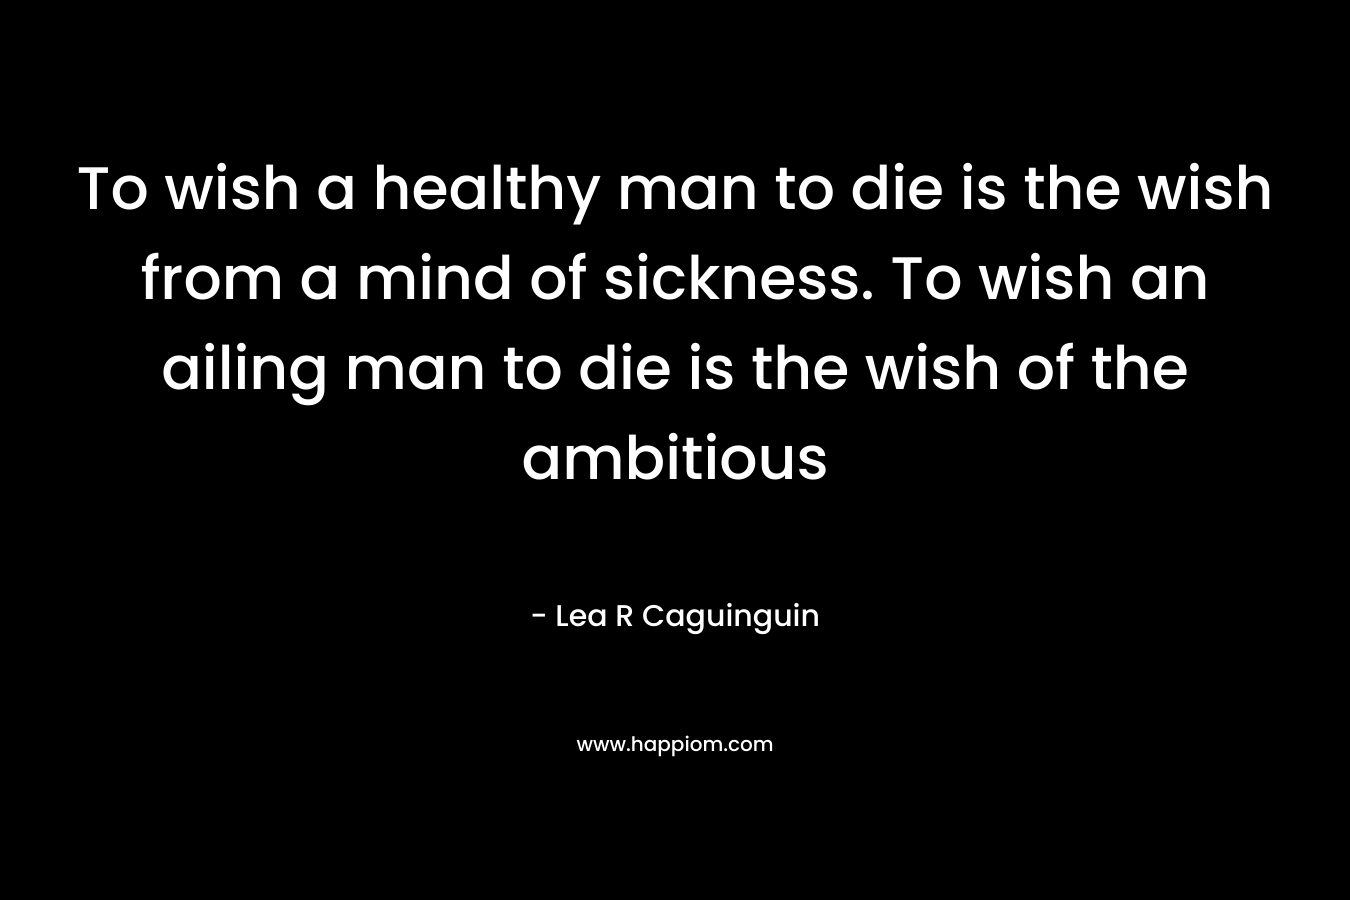 To wish a healthy man to die is the wish from a mind of sickness. To wish an ailing man to die is the wish of the ambitious